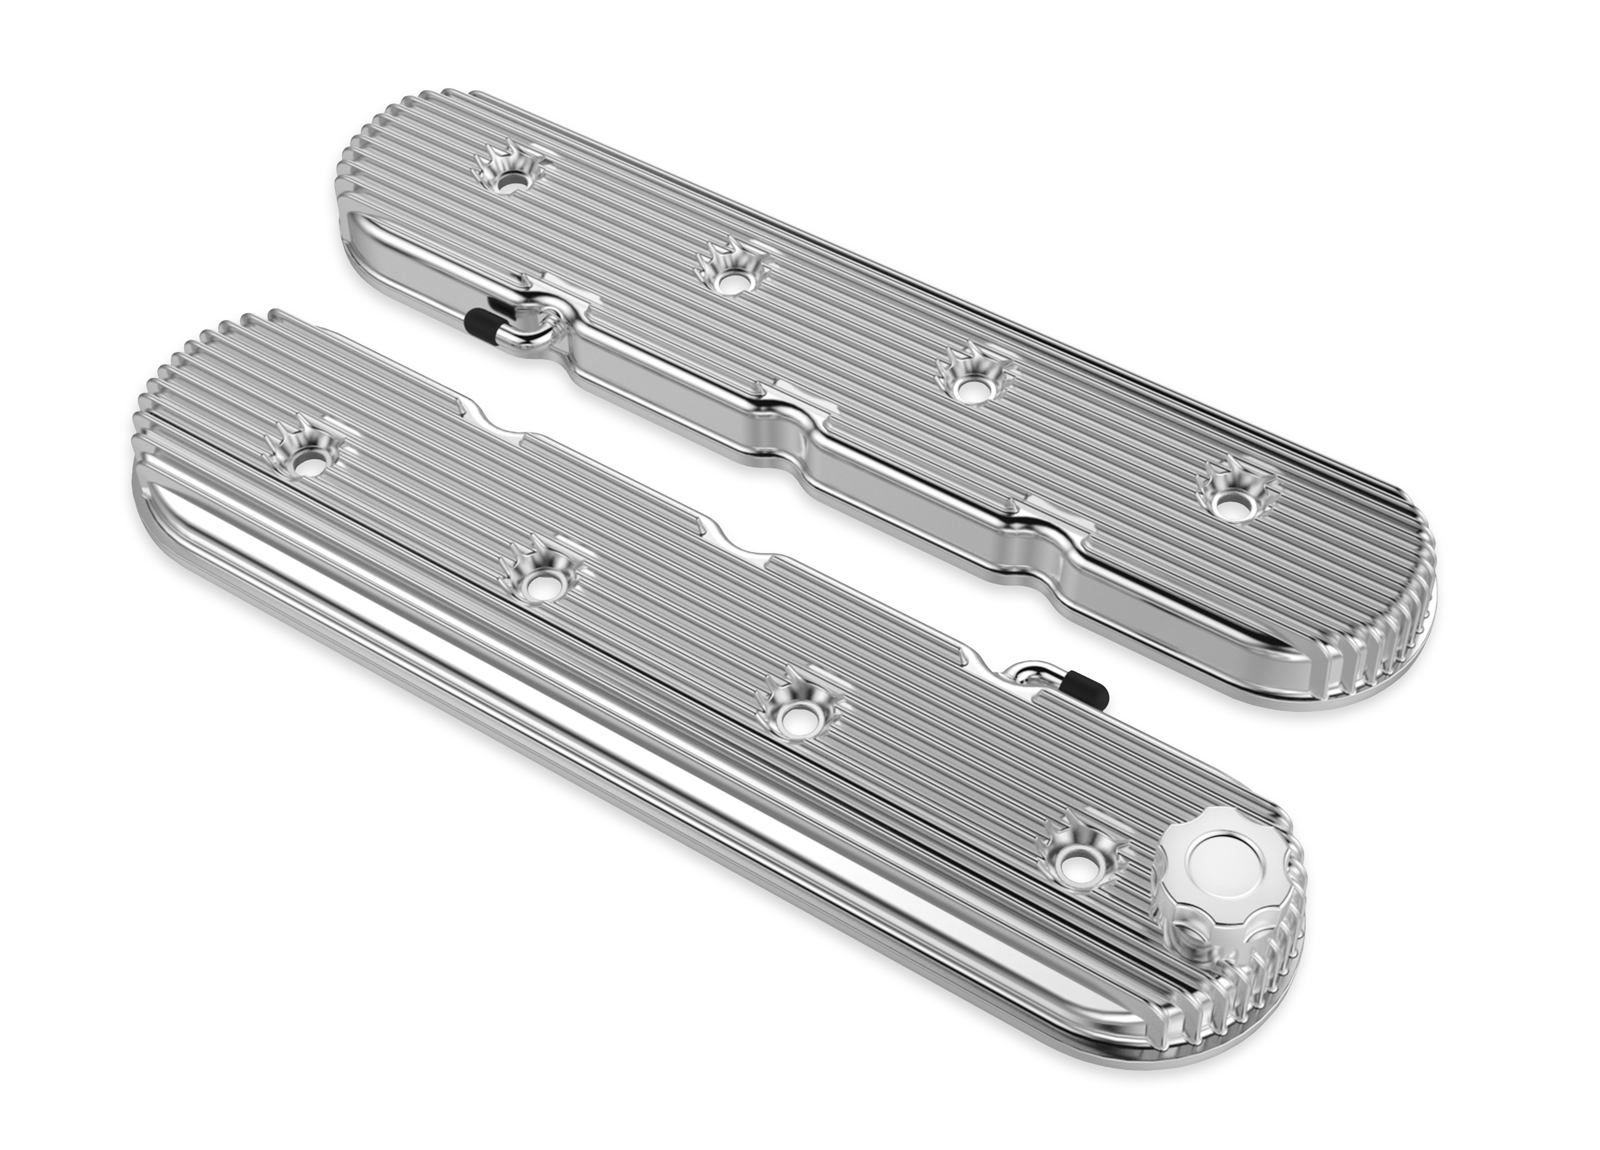 LS1/LS2/LS3/LS6/LS7 Holley Vintage Series Finned Valve Covers - Polished